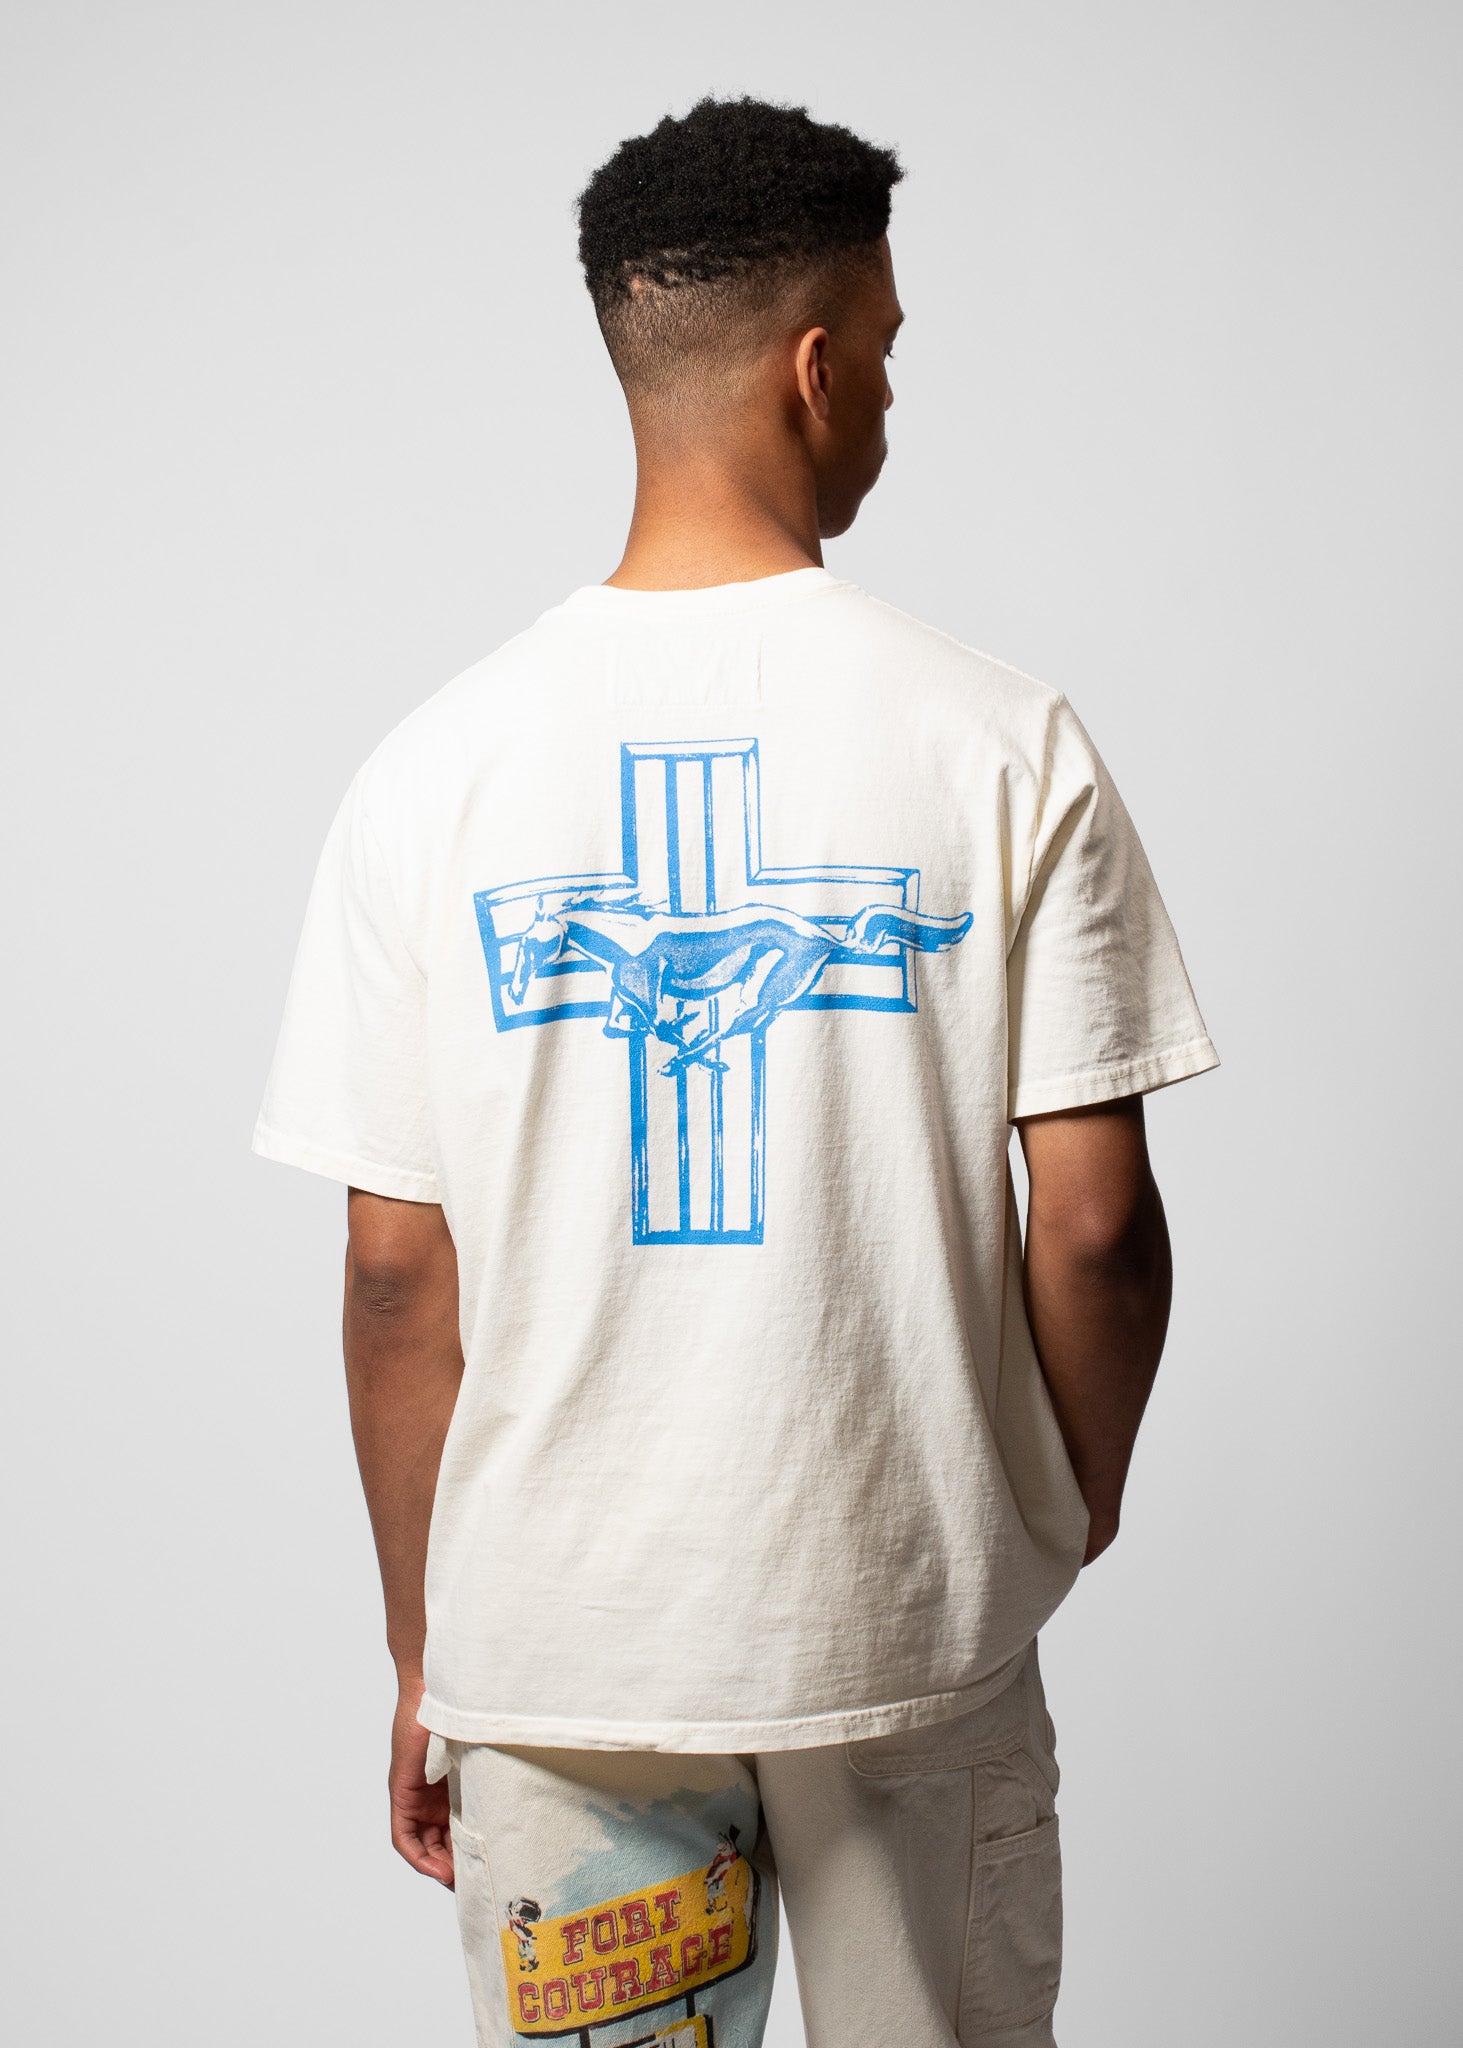 ONE OF THESE DAYS - MUSTANG CROSS TEE - WHITE